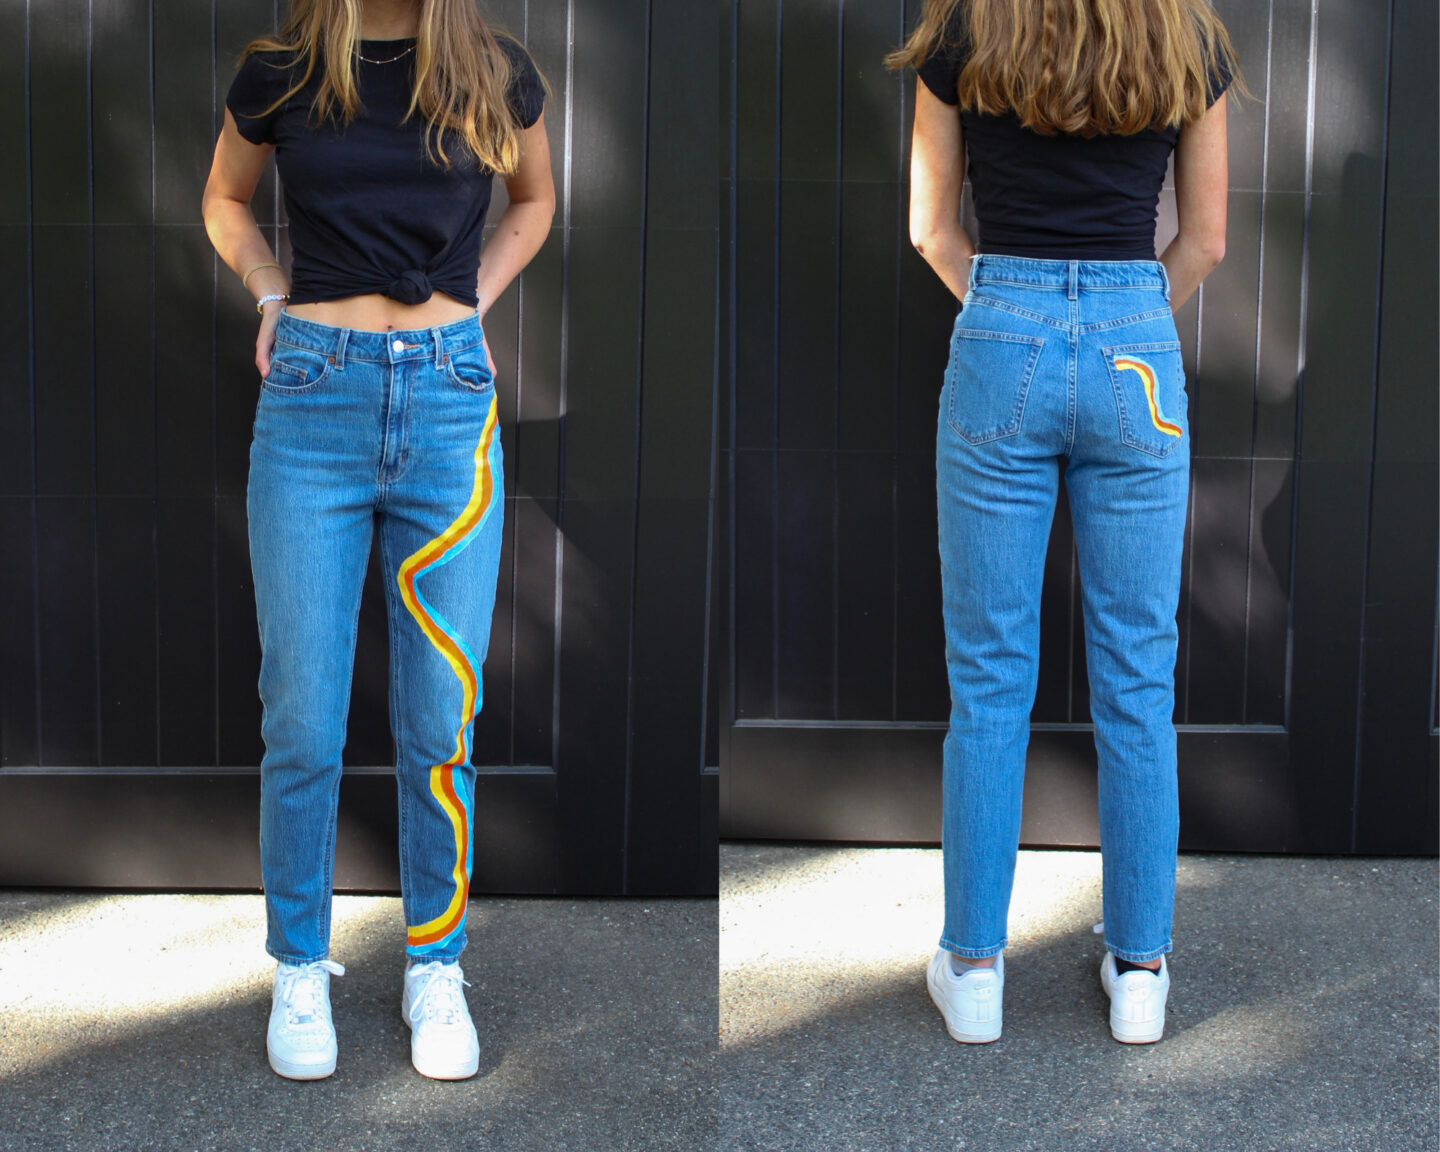 Girl posing in two pictures side to side in black t-shirt and painted jeans with stripes of orange, yellow, and blue down one pant leg and on the opposite back pocket.